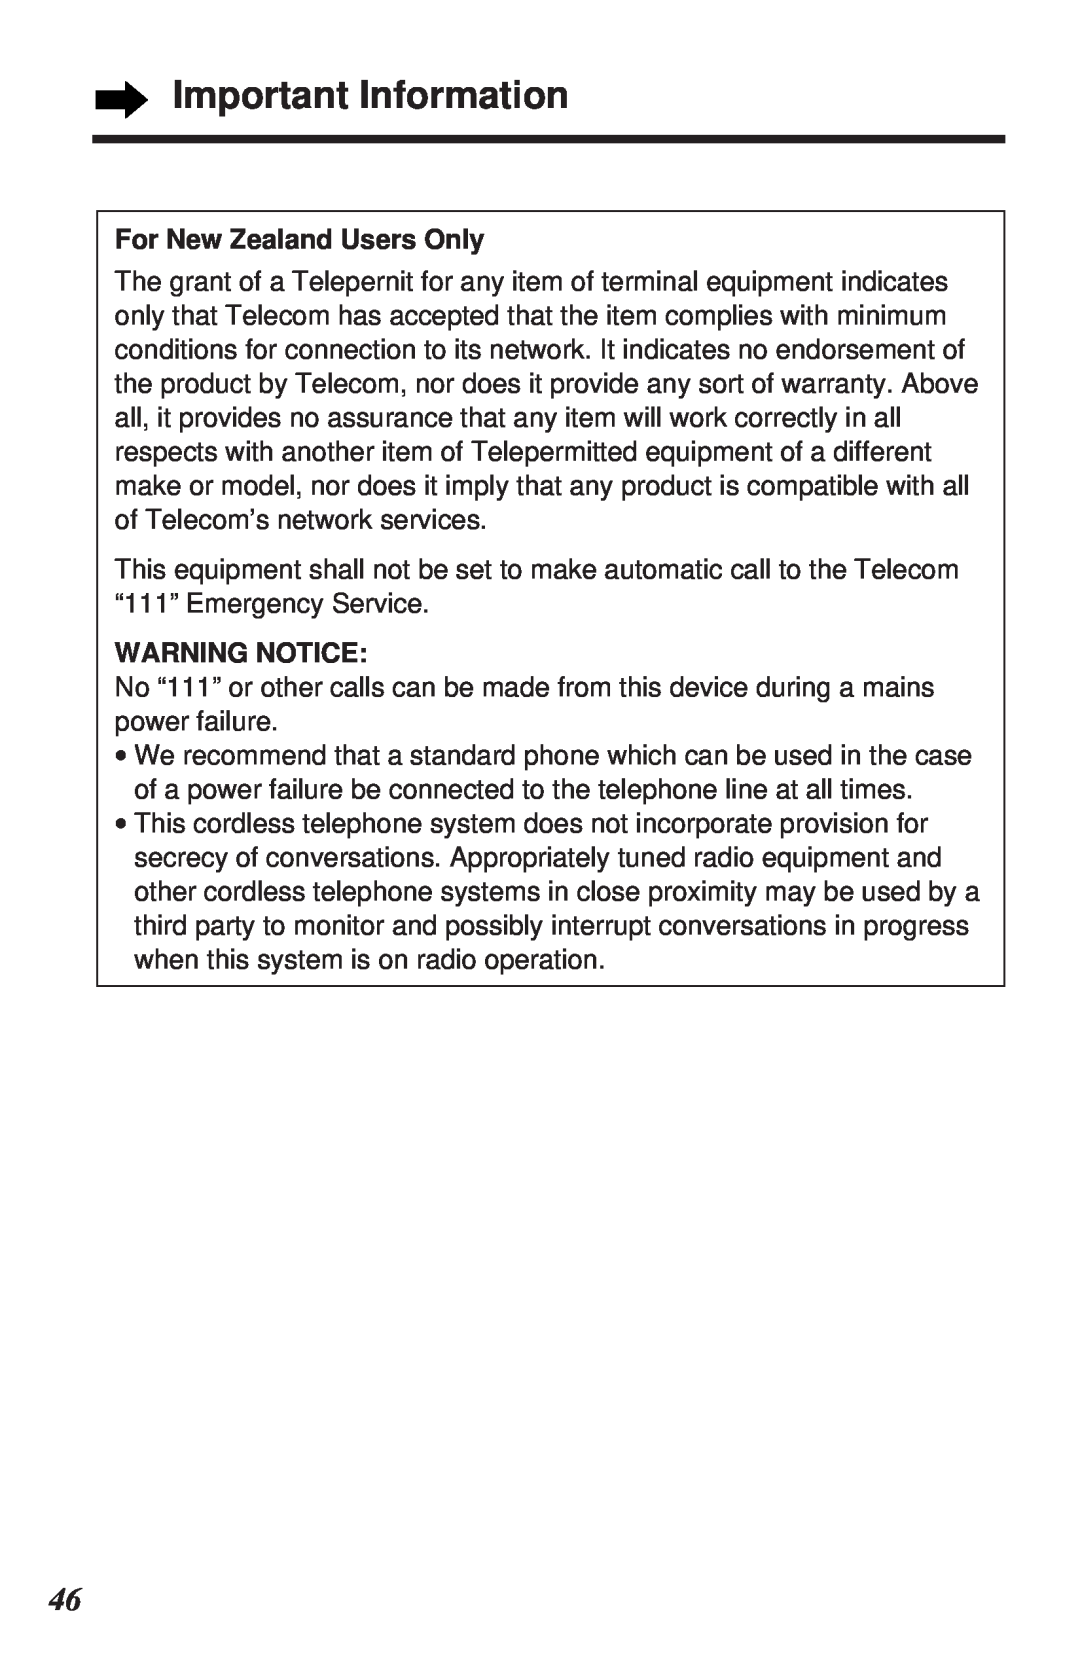 Panasonic KX-TC1105ALN, KX-TC1105ALB Important Information, For New Zealand Users Only, Warning Notice 